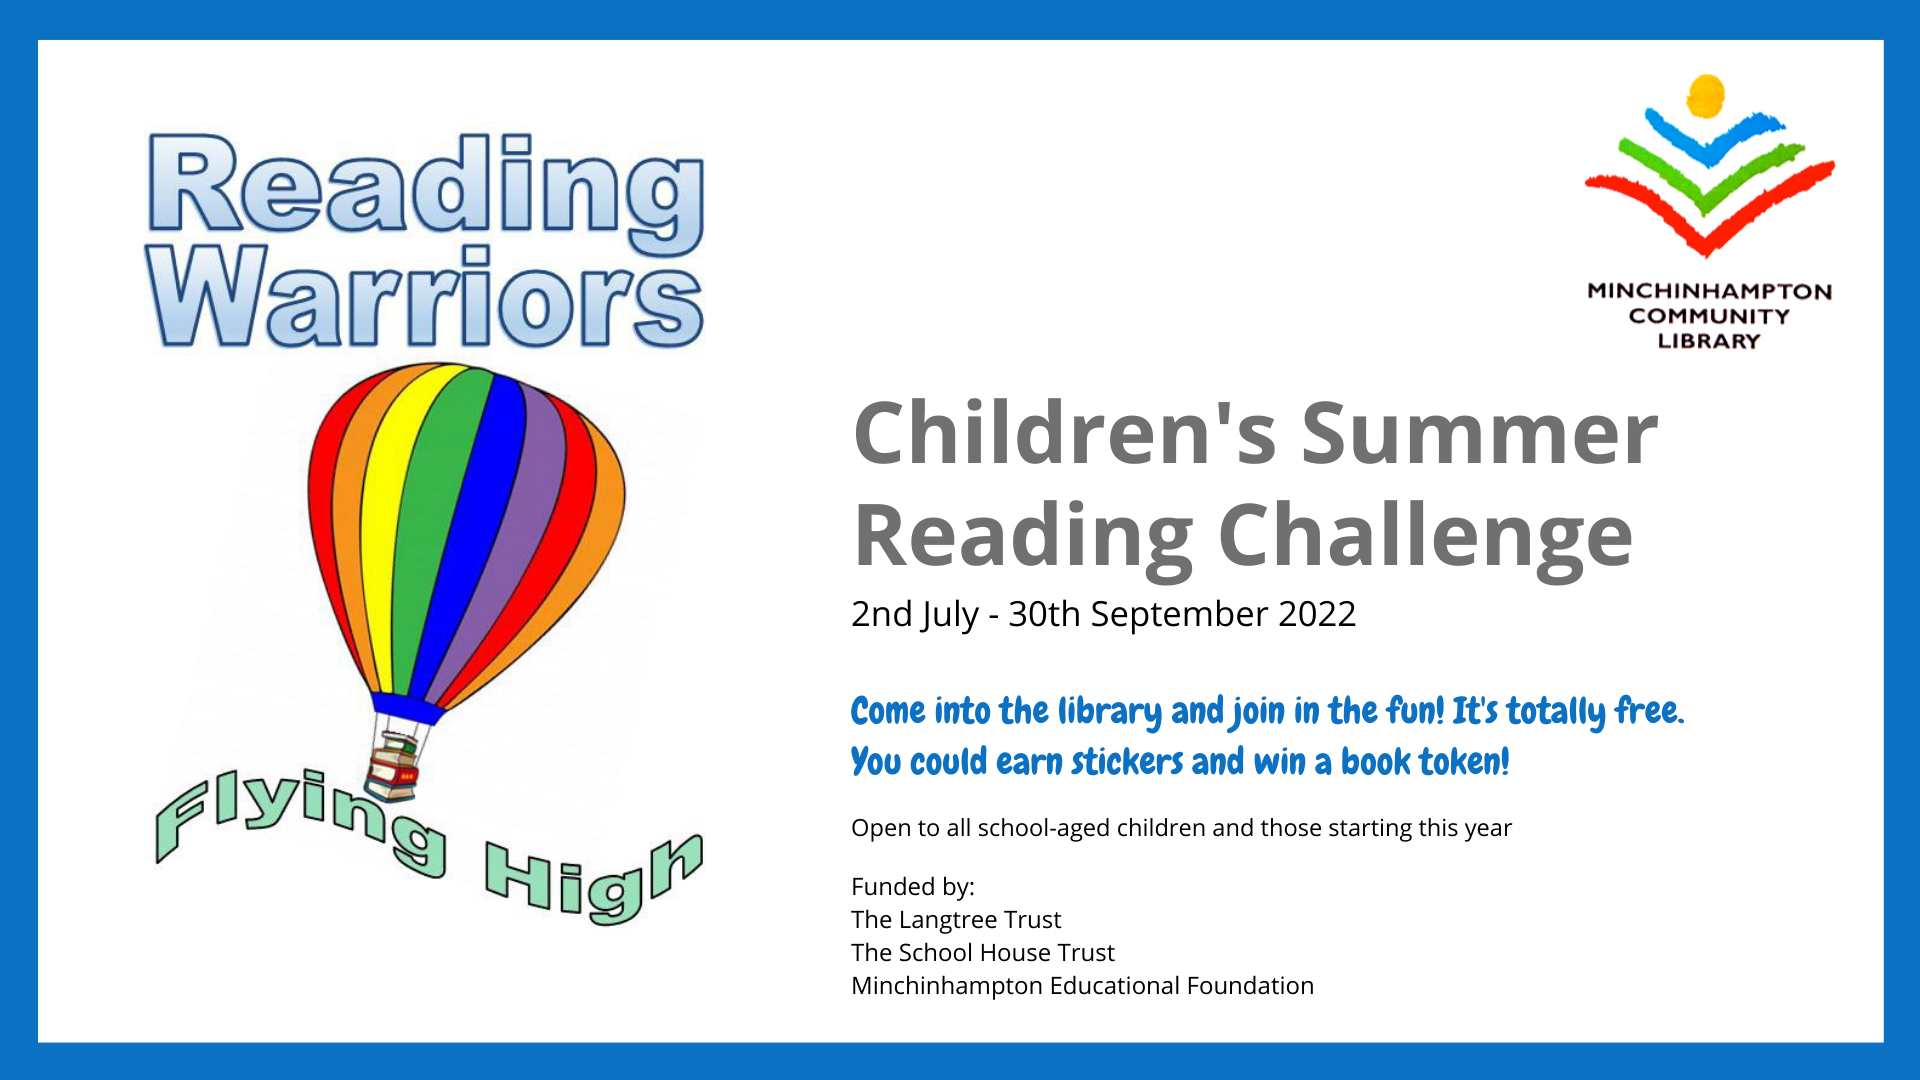 The Summer Reading Challenge is back!